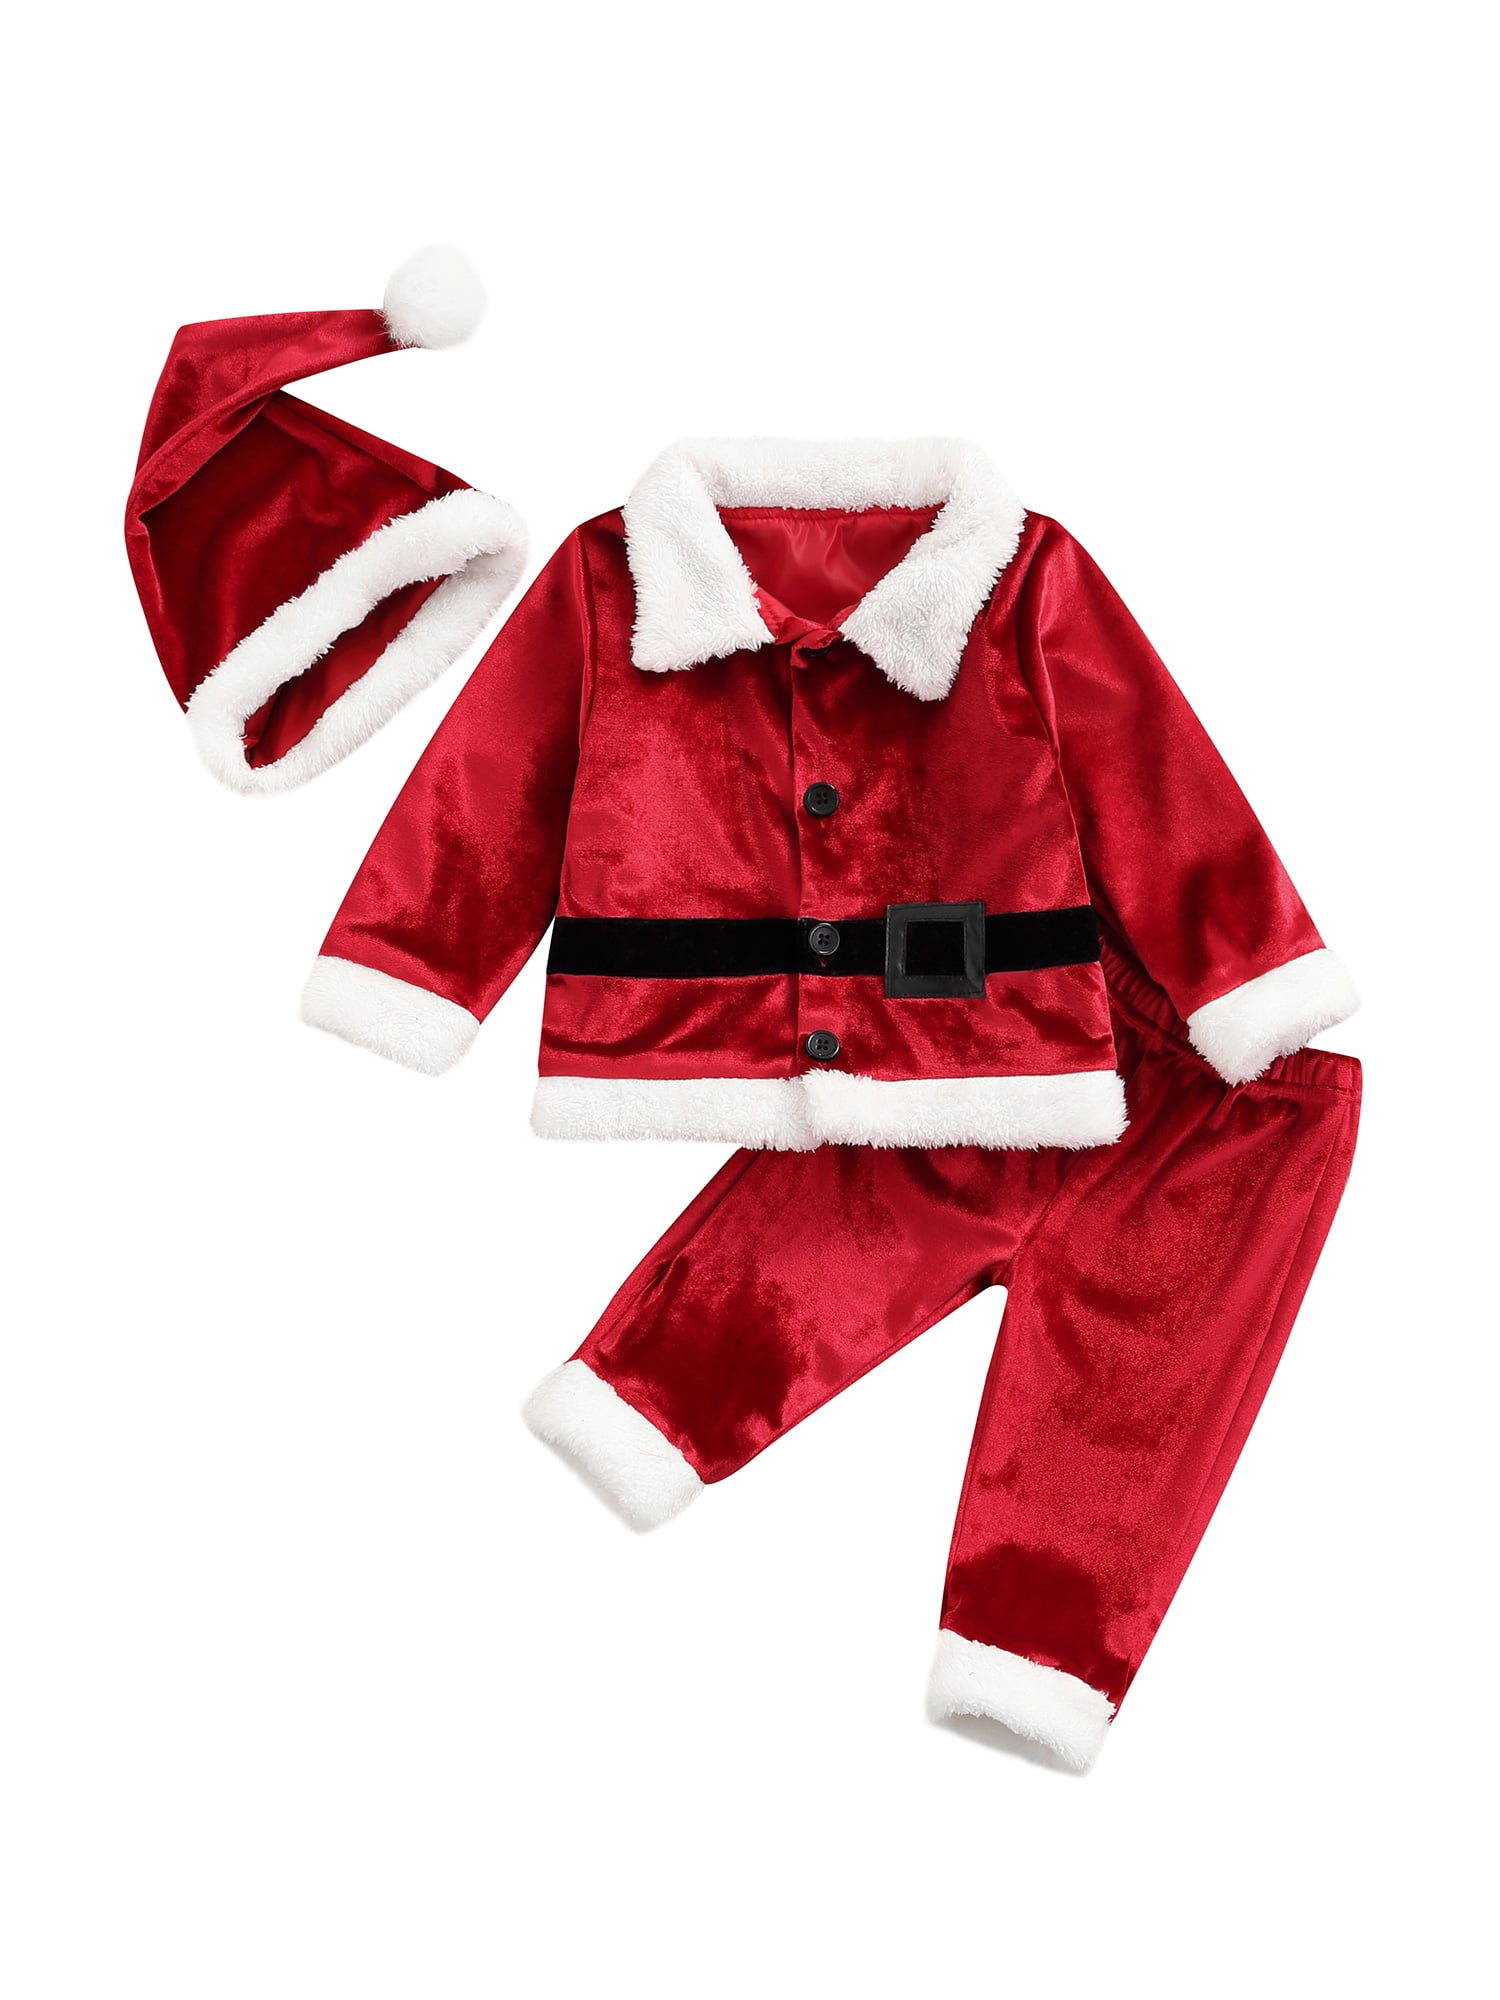 Kids Baby Boys & Girls Christmas Xmas Party Santa Claus Costume Outfits Sets Hat